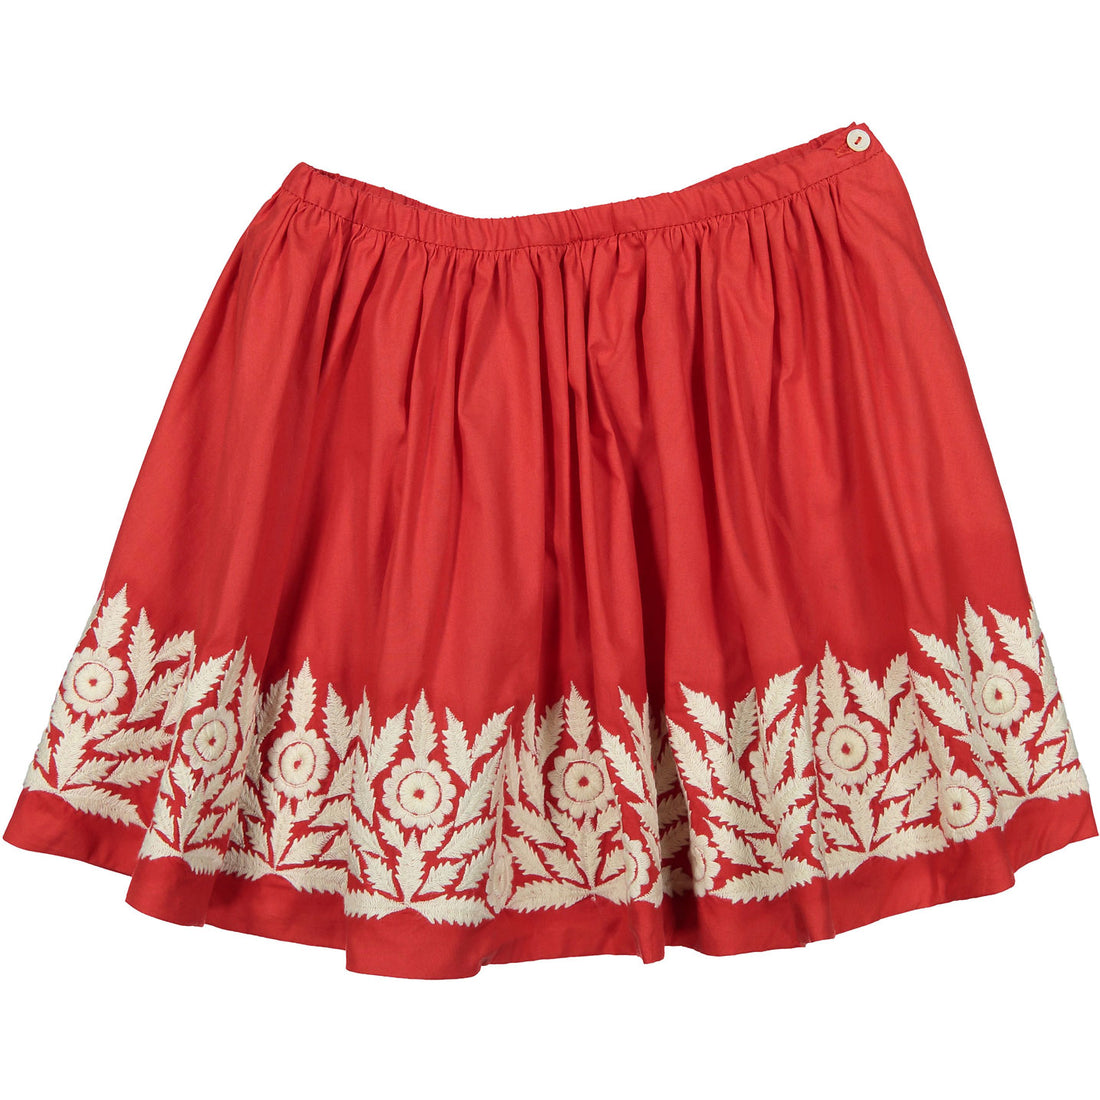 Bonpoint Red Embroidered Flair Skirt